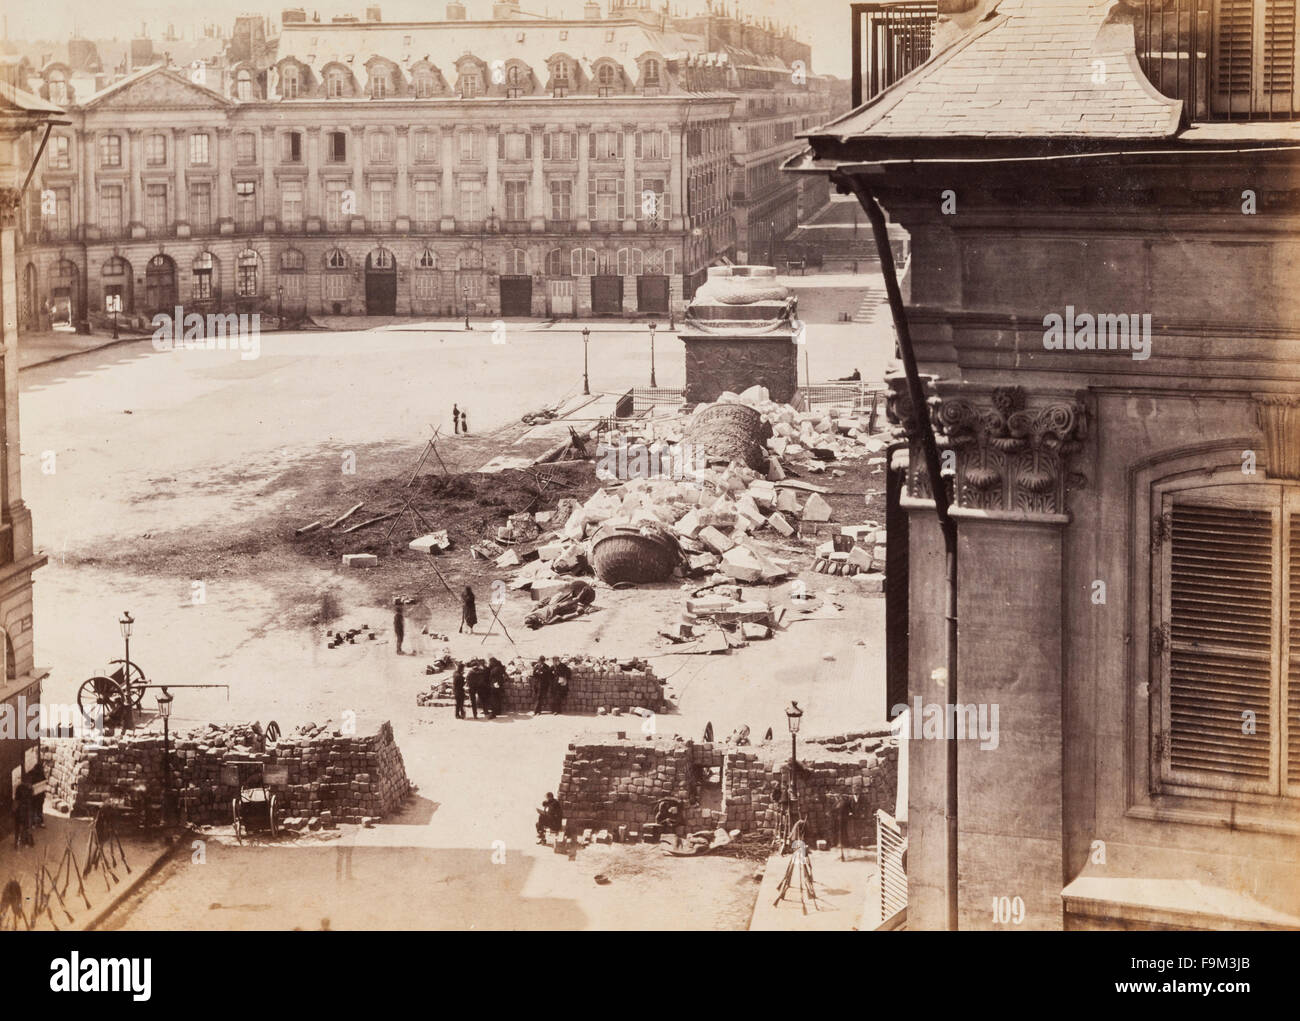 Paris, France, after the Franco-Prussian War of 1870. The Place Vendôme in 1871, showing the remains of the Vendôme Column, demolished by order of the Paris Commune. Stock Photo